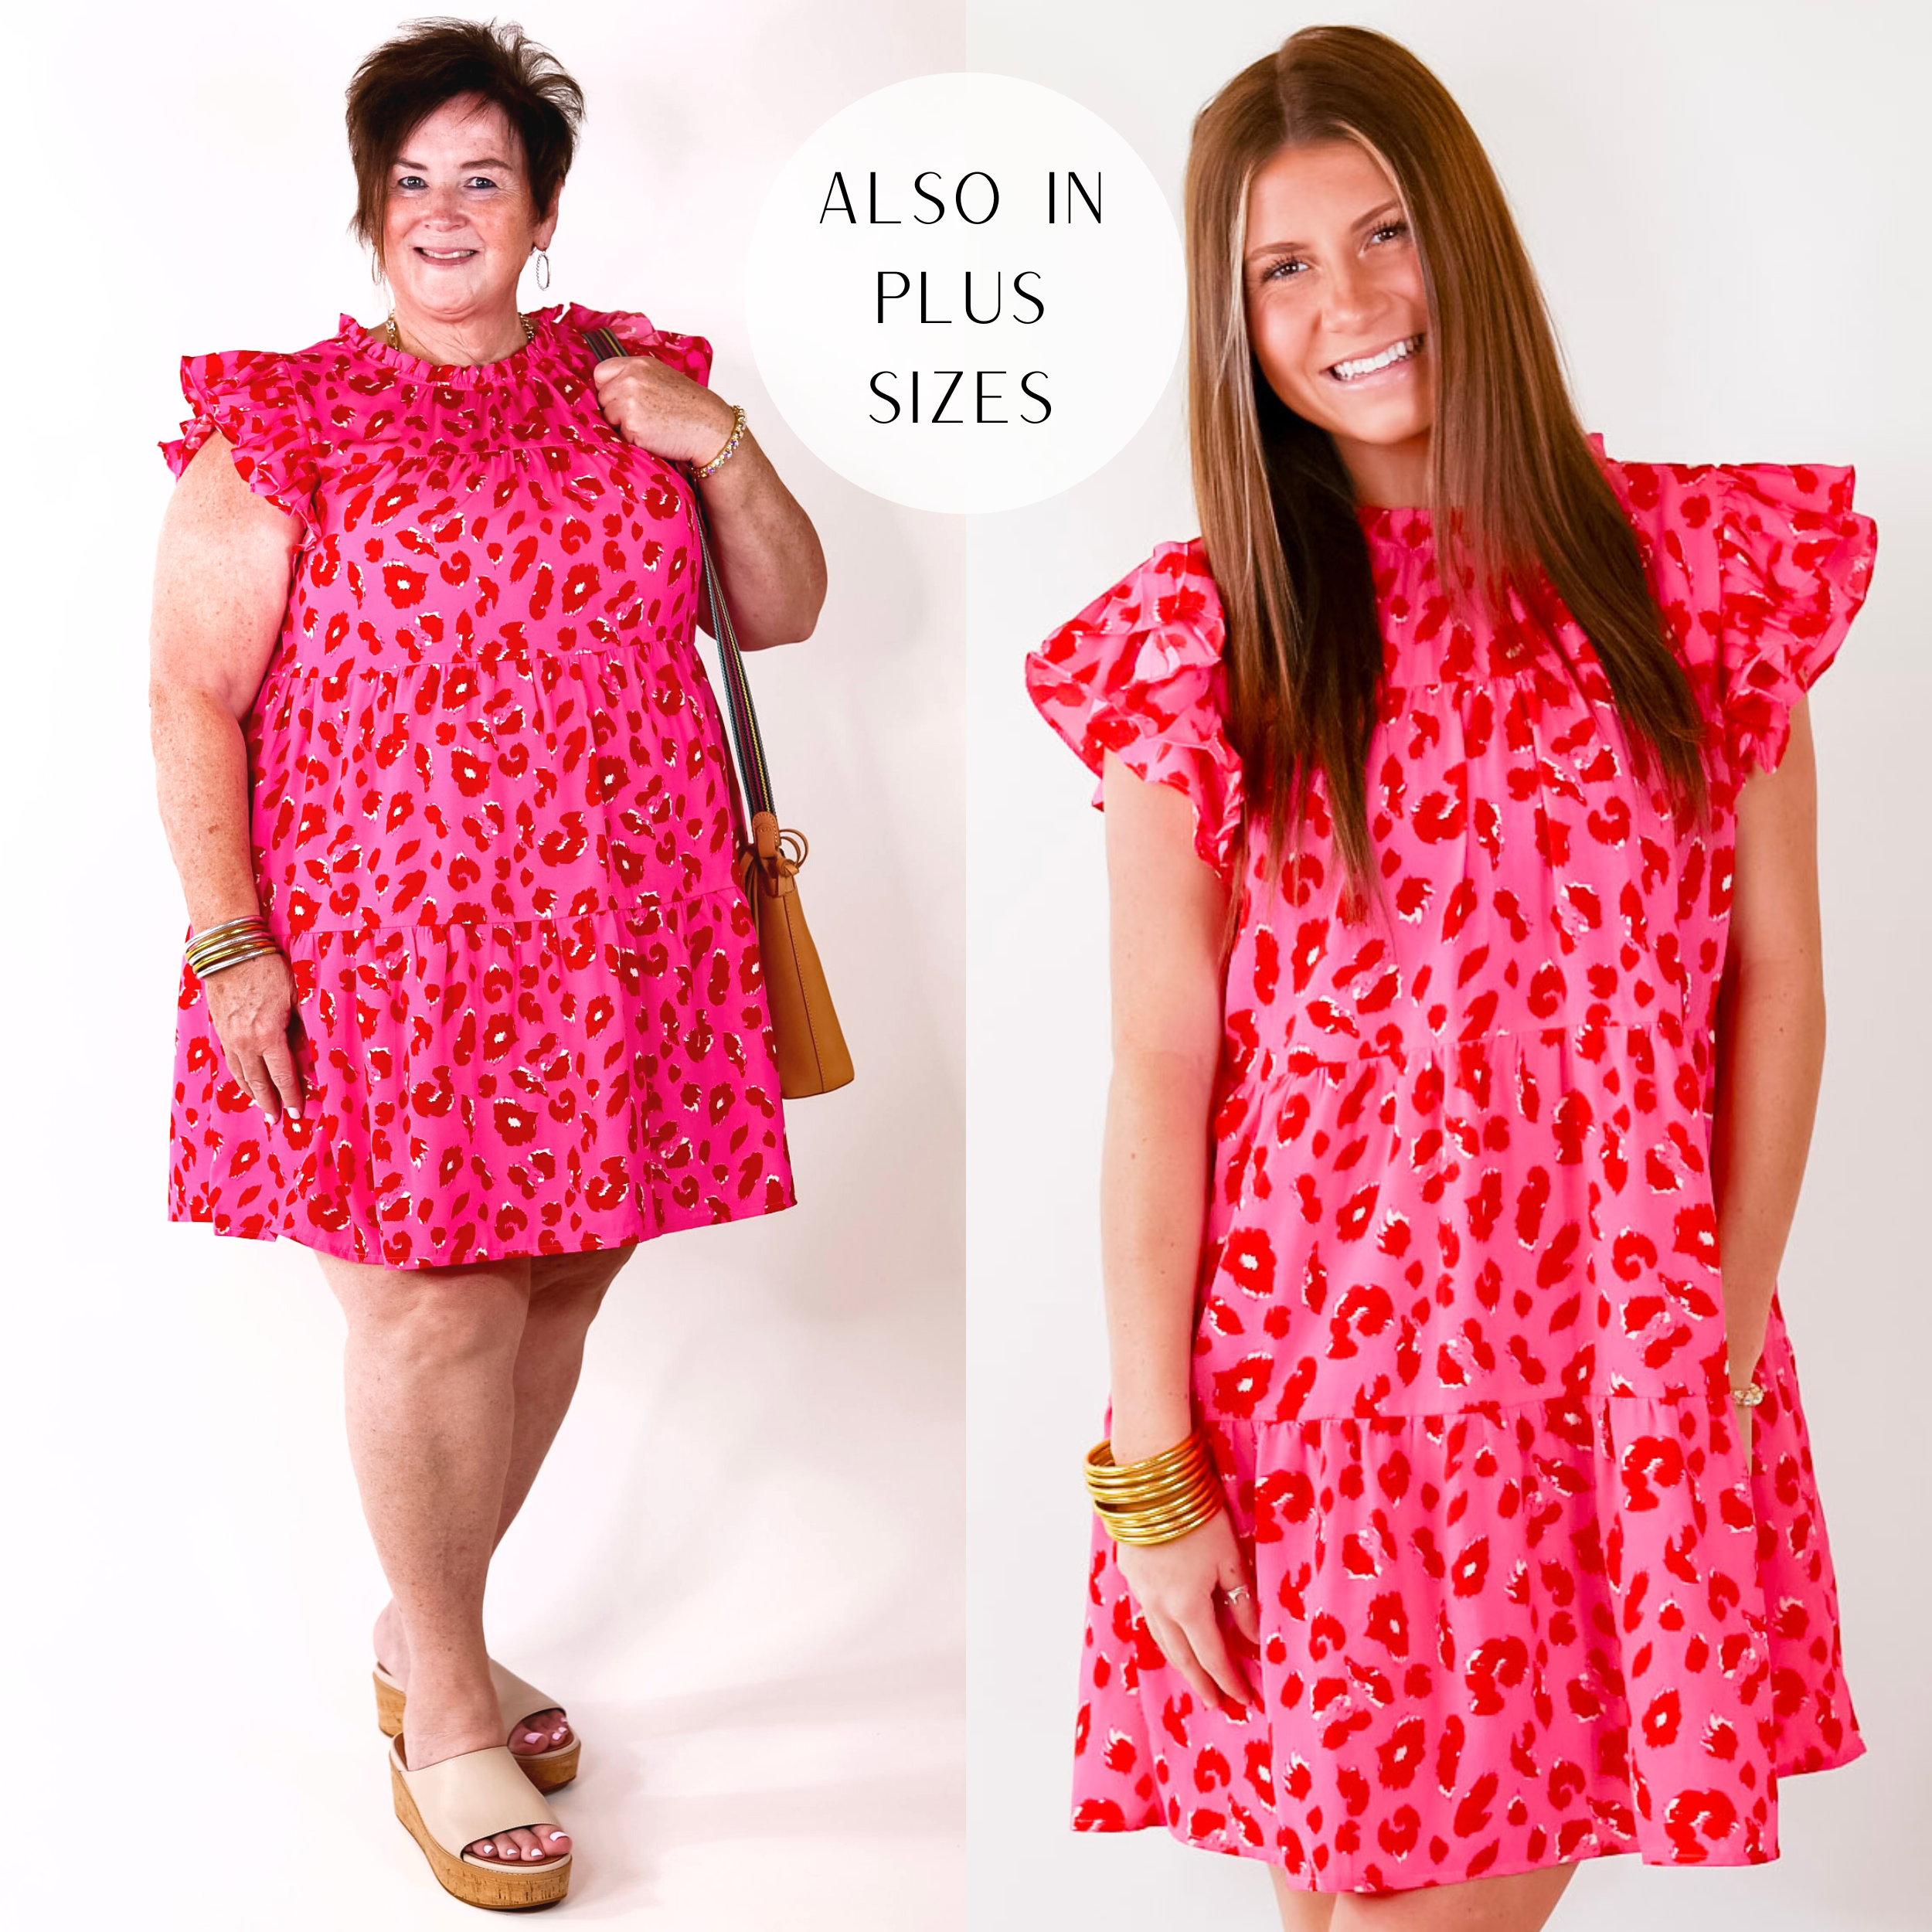 Daring and Delightful Leopard Print Dress with Ruffle Cap Sleeves in Pink